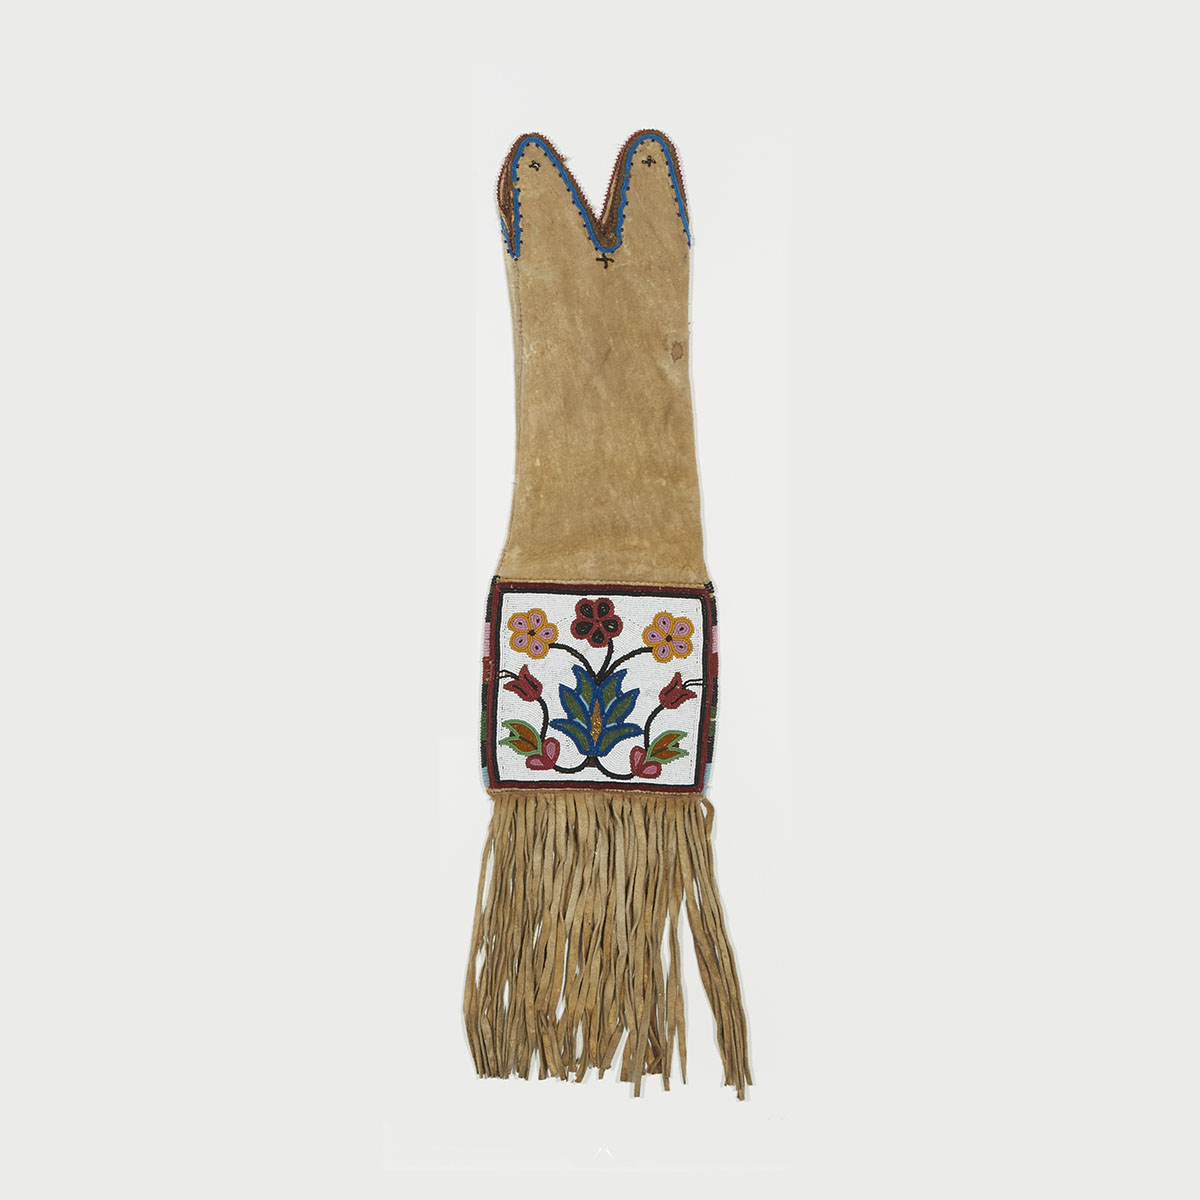 Northern Plains Cree Beaded Hide Pipe Bag, late 19th century